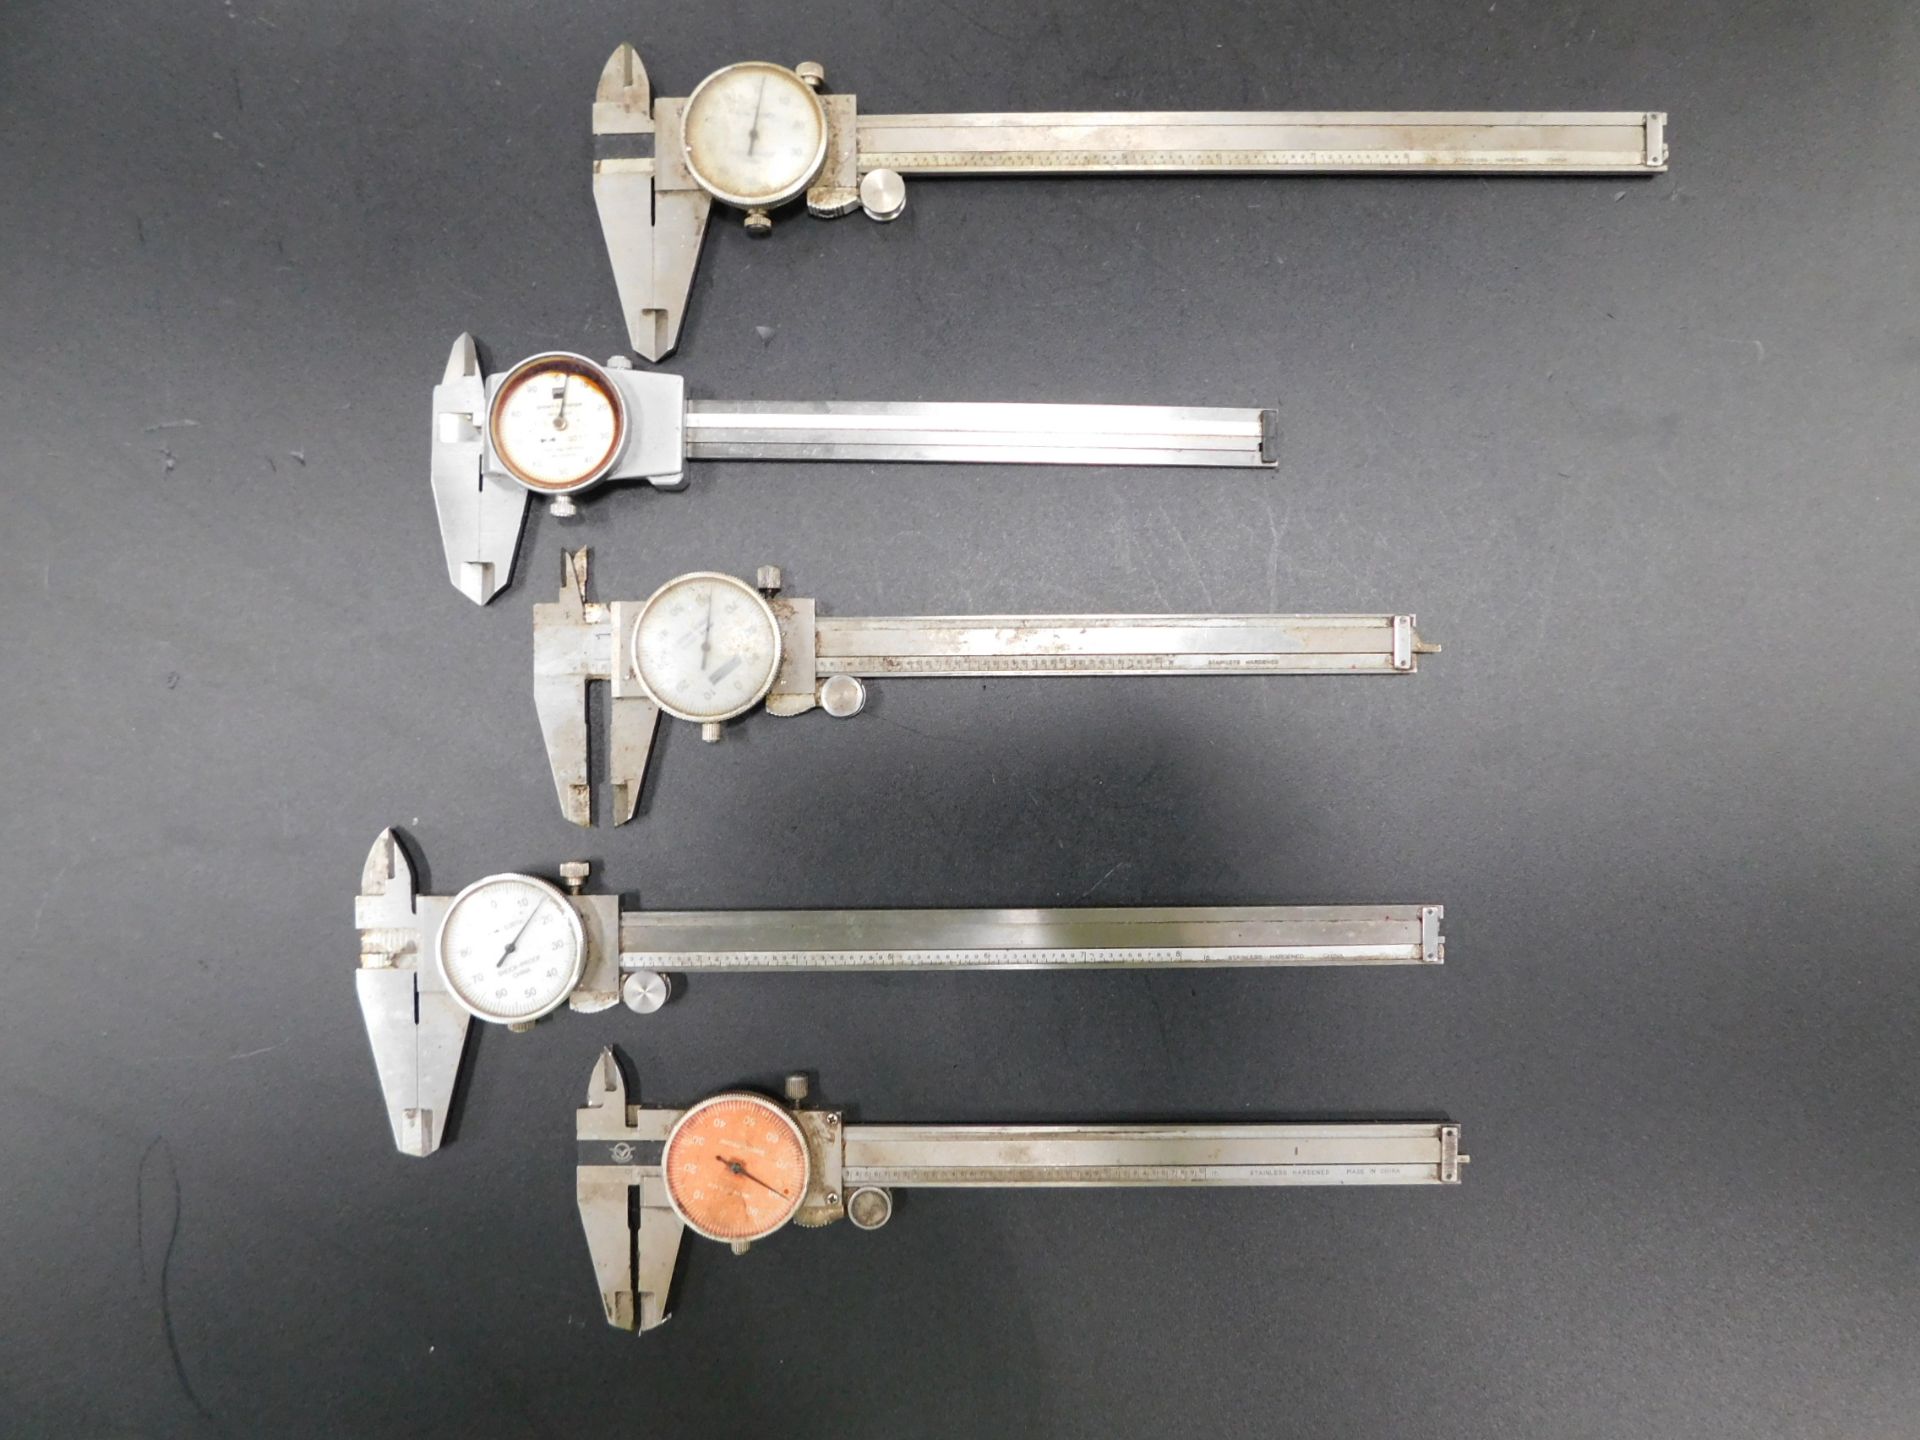 (4) 6" and (1) 8" Dial Calipers